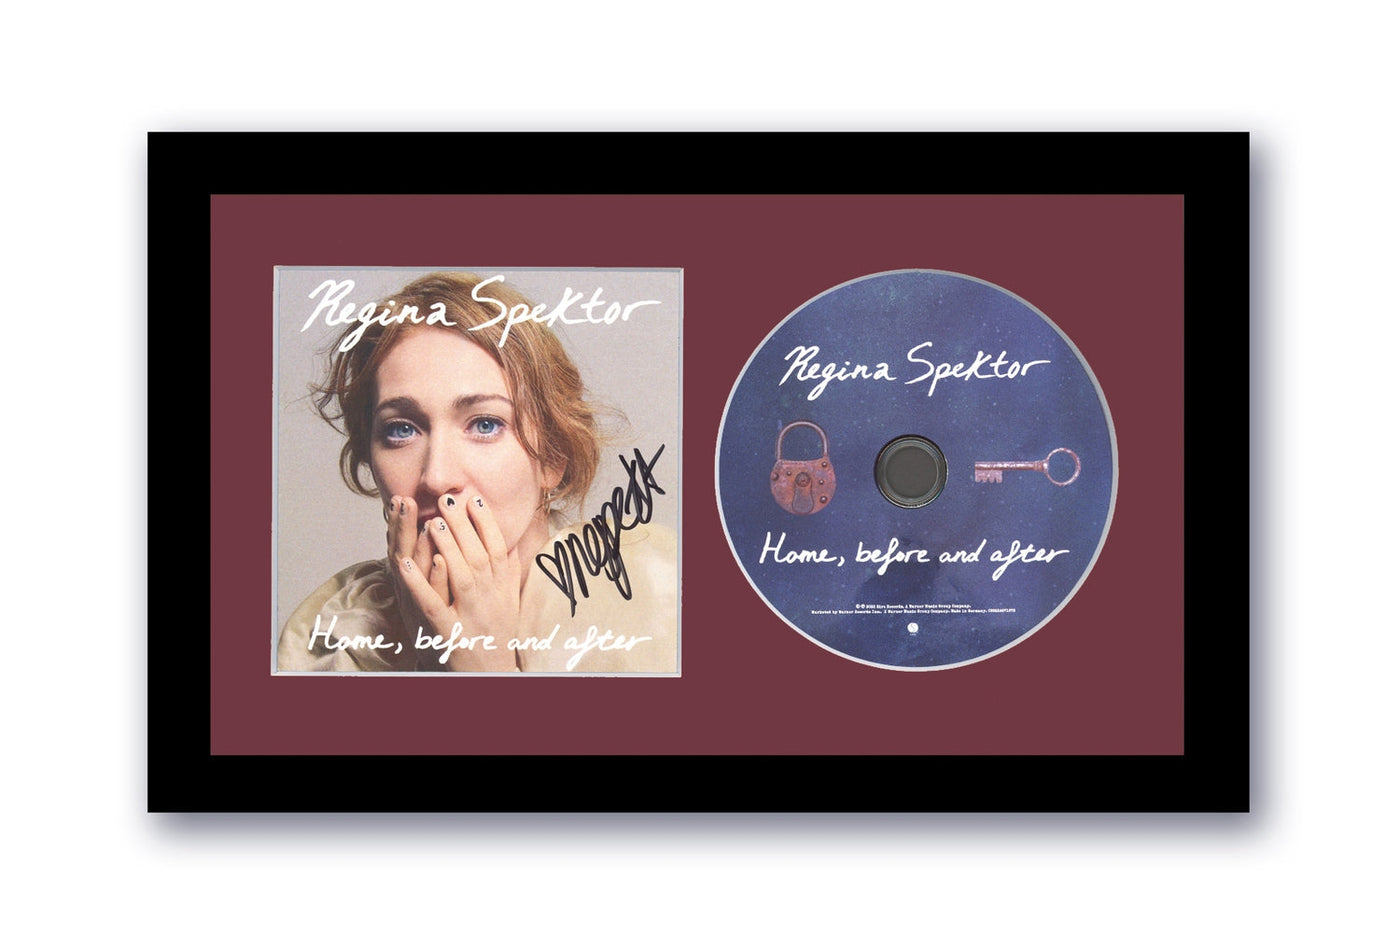 Regina Spektor Signed 7x12 Framed CD Home before and after Autographed ACOA #3